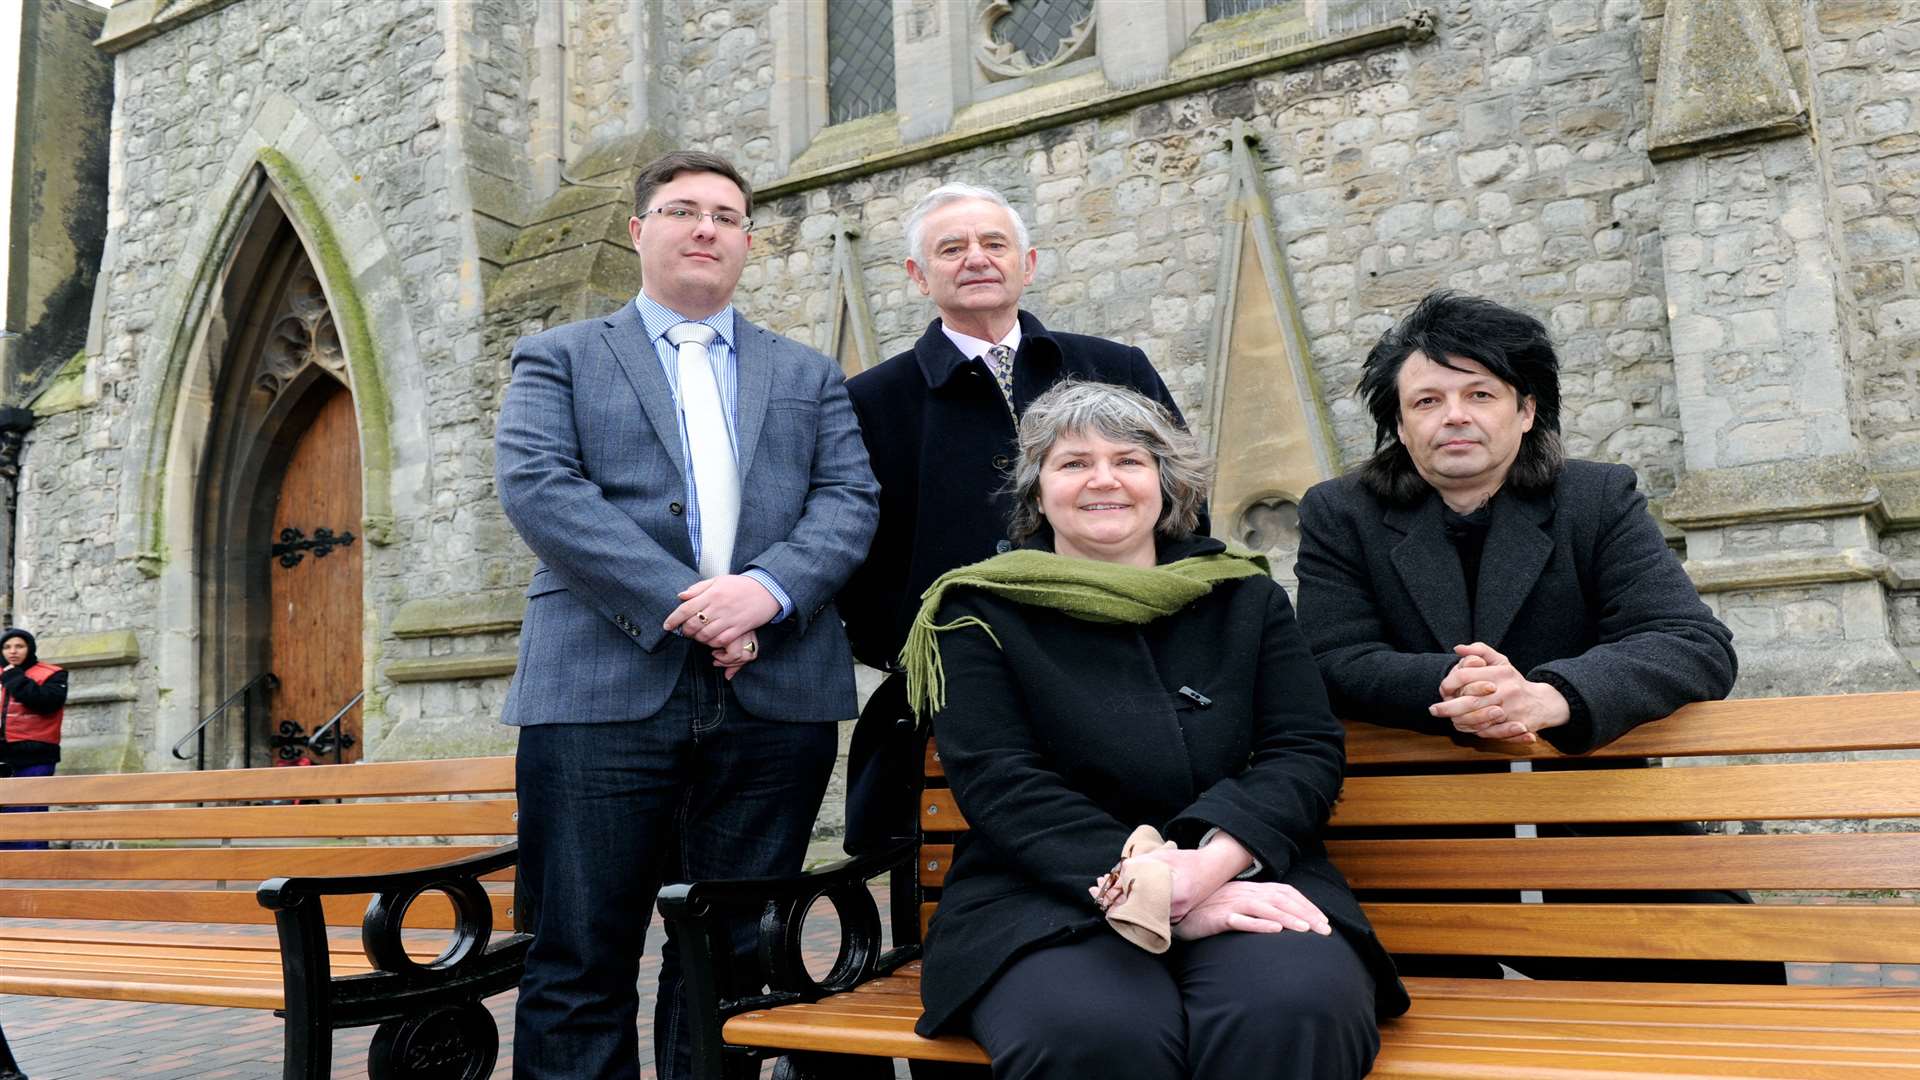 Cllr Lee Burgess, Cllr Roger Truelove and Cllr Mike Baldock commissioned grants for a High Street makeover. They are pictured with Sally Reeve from Baileys Coffee shop sitting on one of the new benches